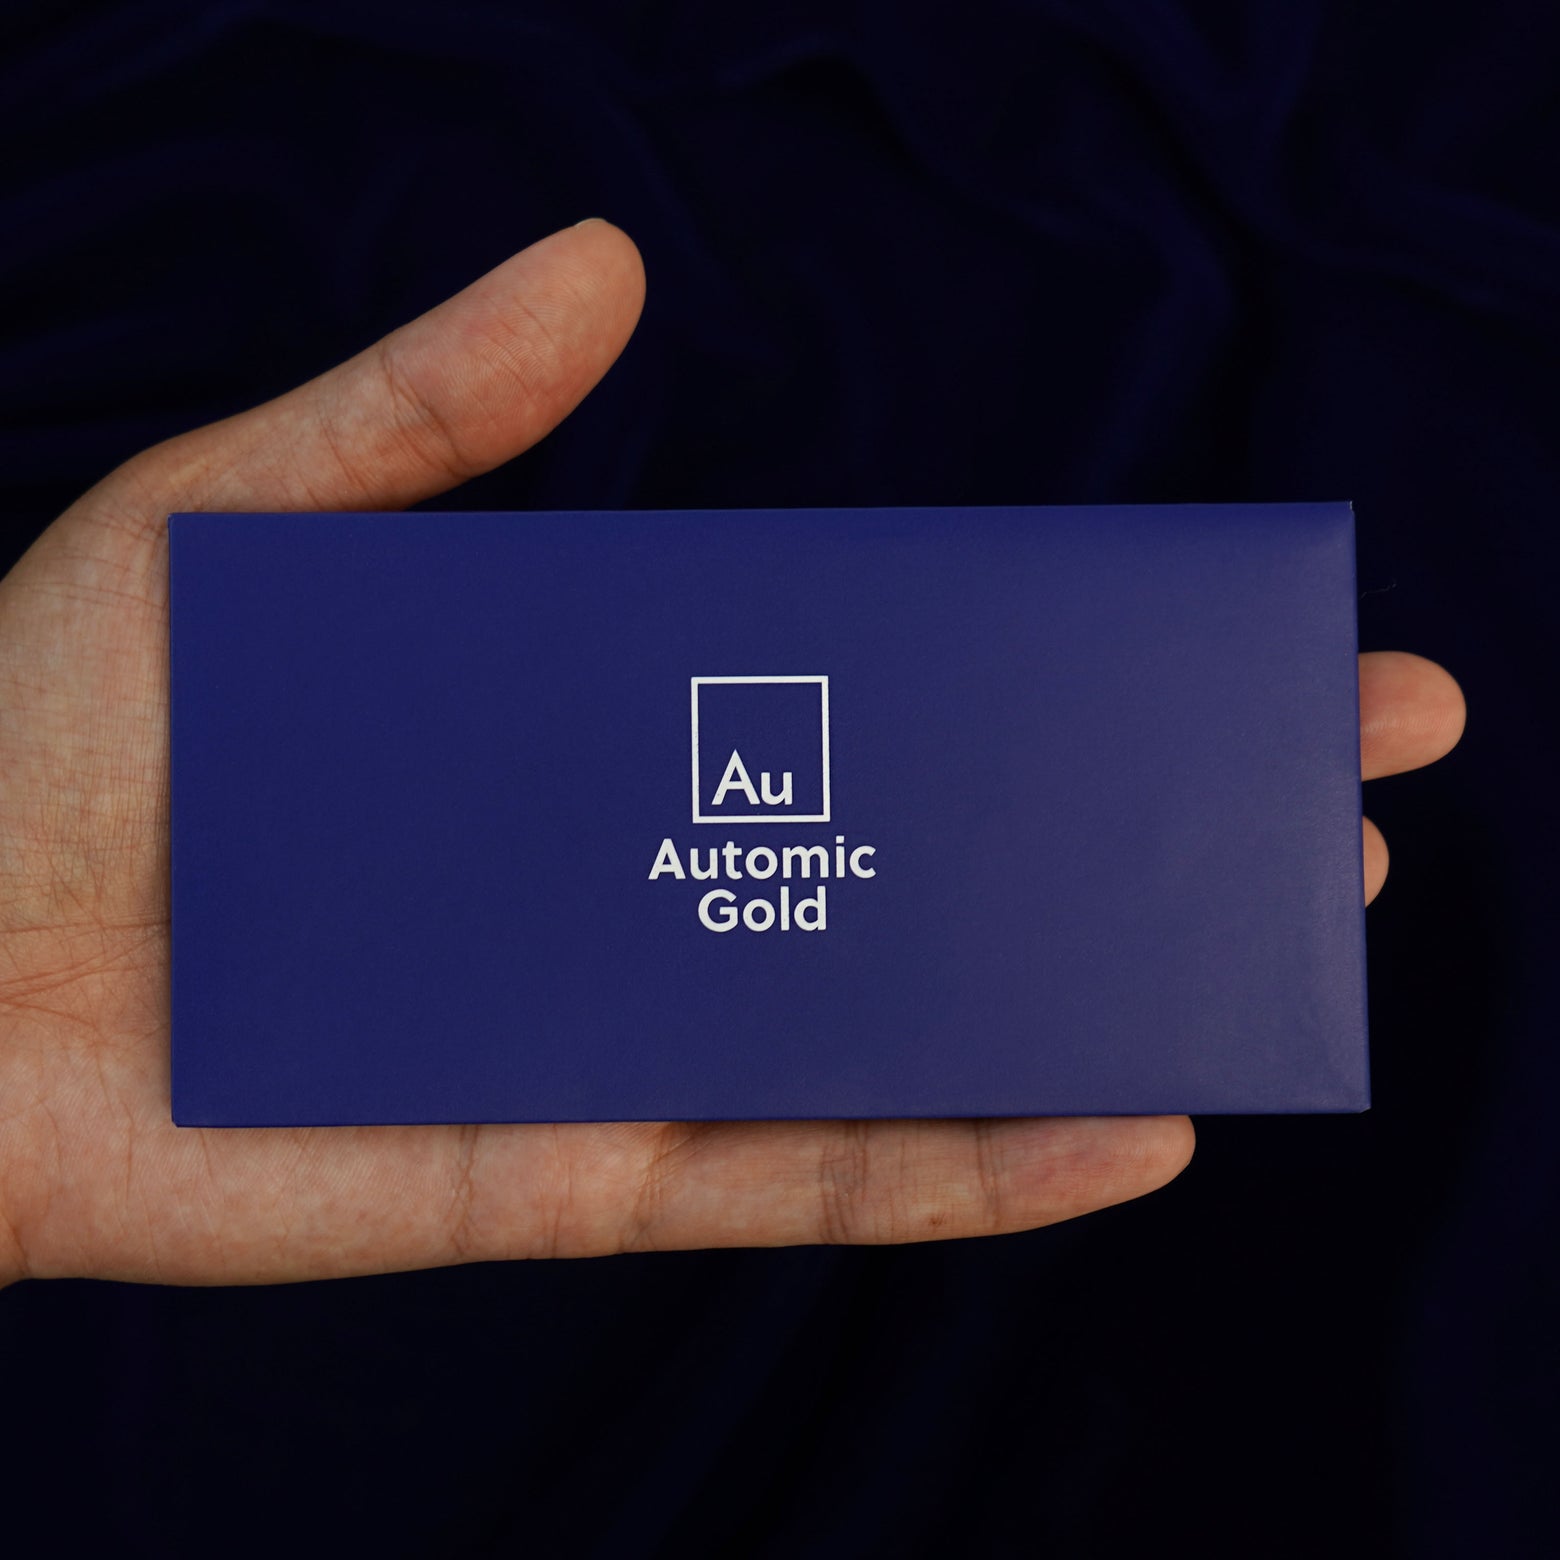 An Automic Gold branded envelope containing a polishing cloth sitting in a model's hand